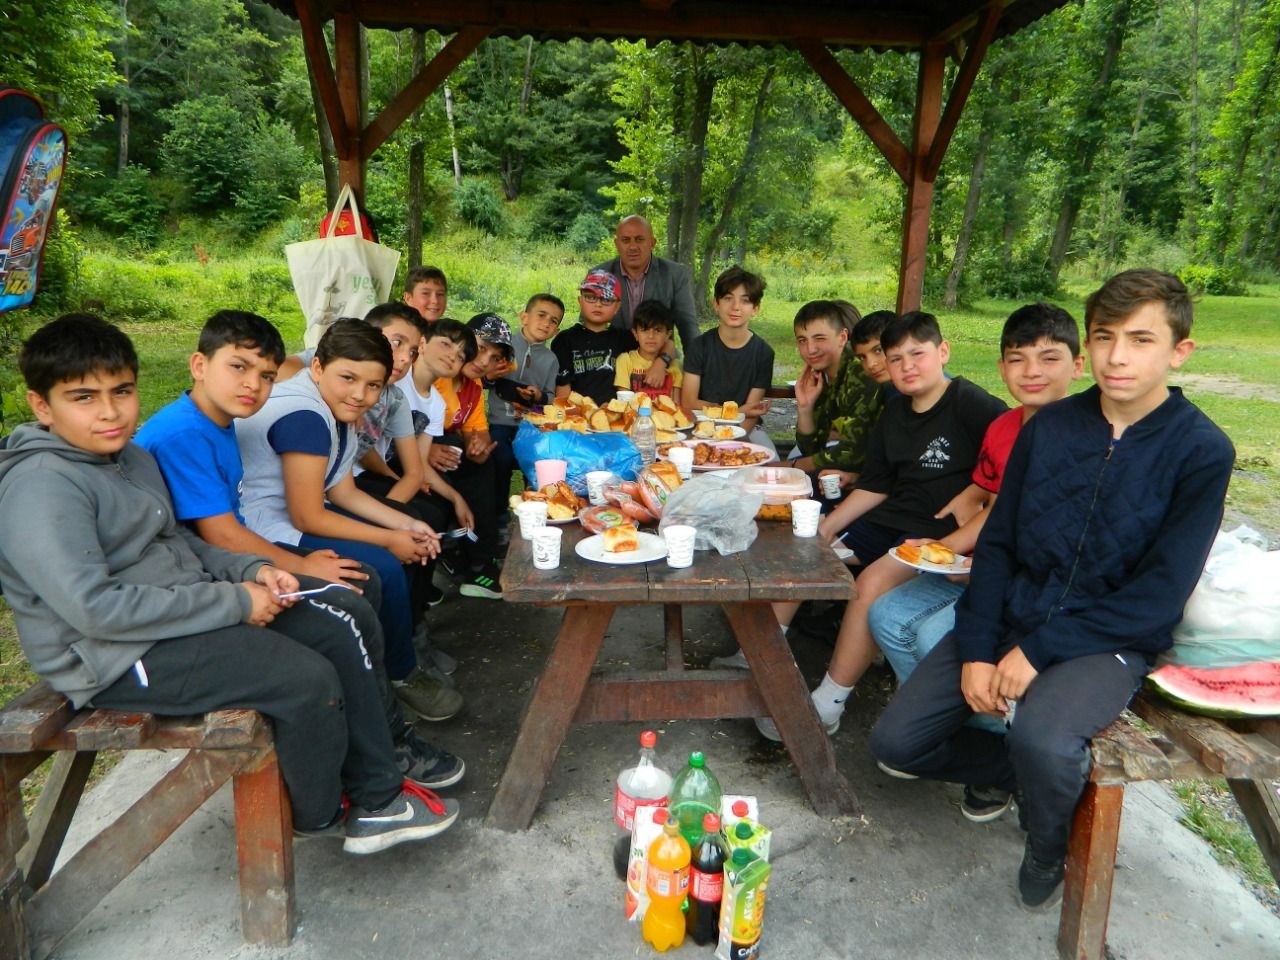 Picnic feast for Summer Qur’an course students